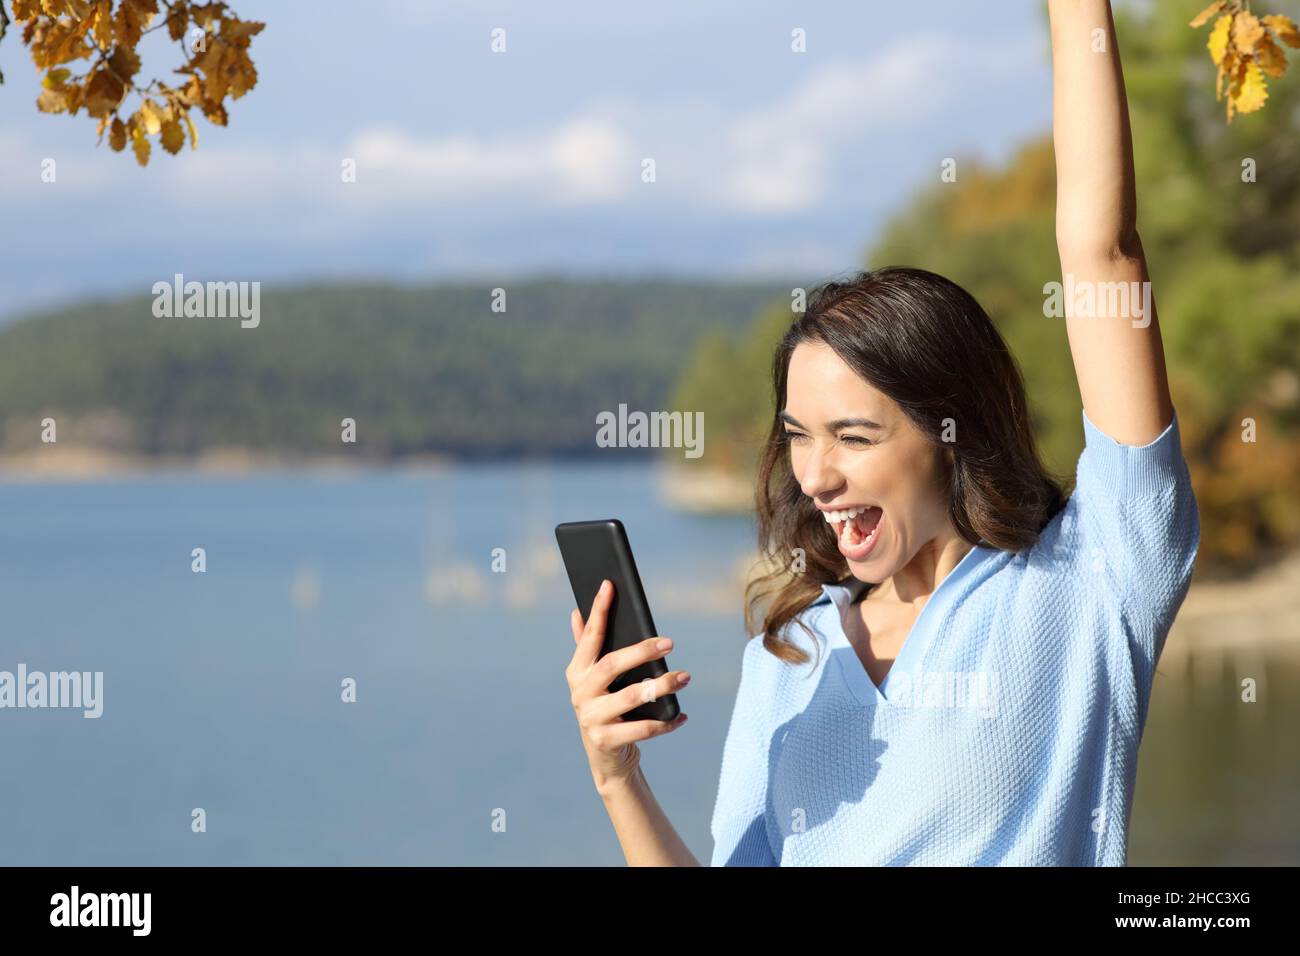 Excited woman checking smart phone celebrating good news outdoors Stock Photo